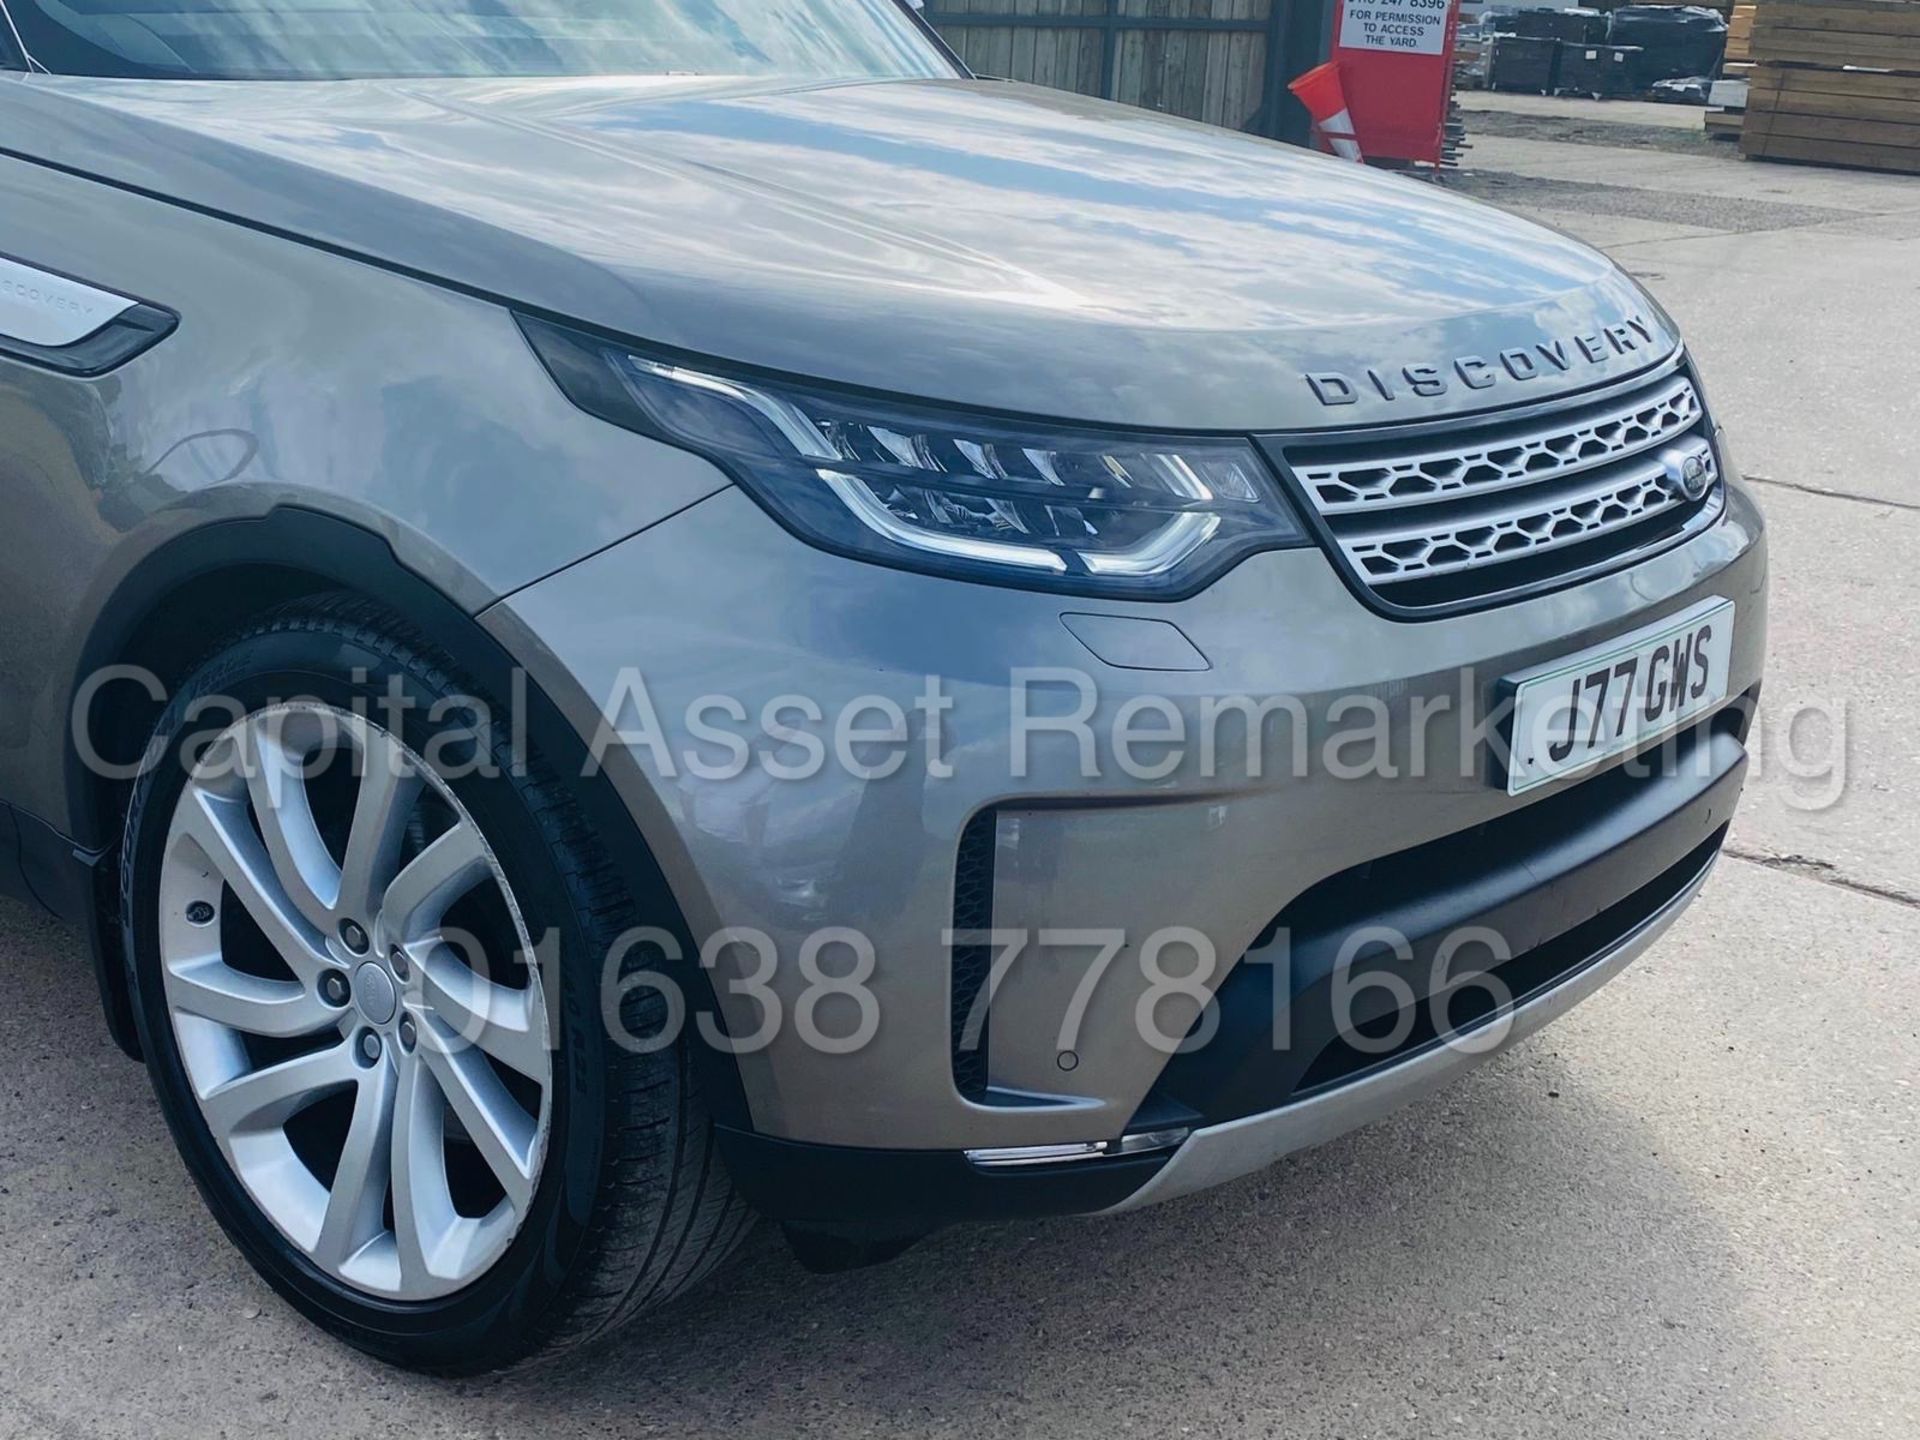 (On Sale) LAND ROVER DISCOVERY *HSE* 7 SEATER (2017 - NEW MODEL) '3.0 TD6 - 258 BHP - 8 SPEED AUTO' - Image 15 of 68